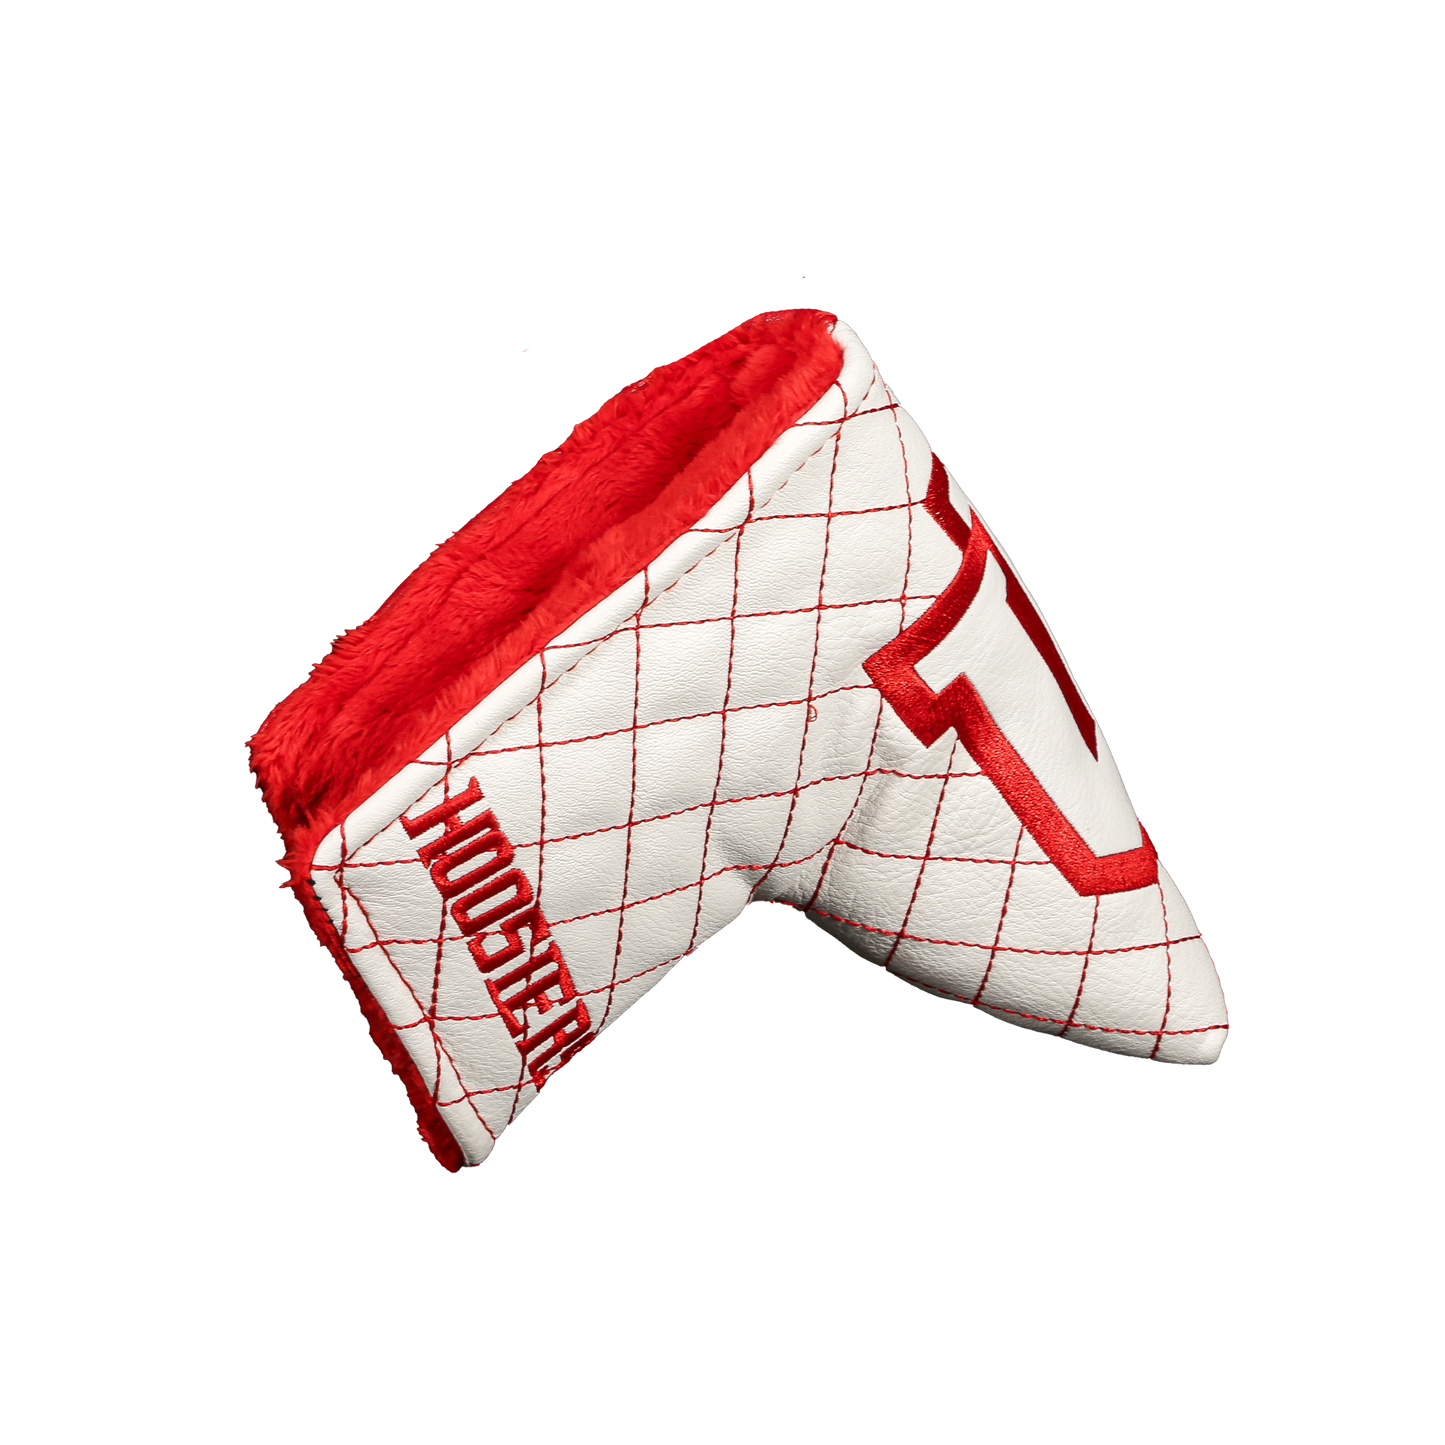 Indiana "Hoosiers" Blade Putter Cover